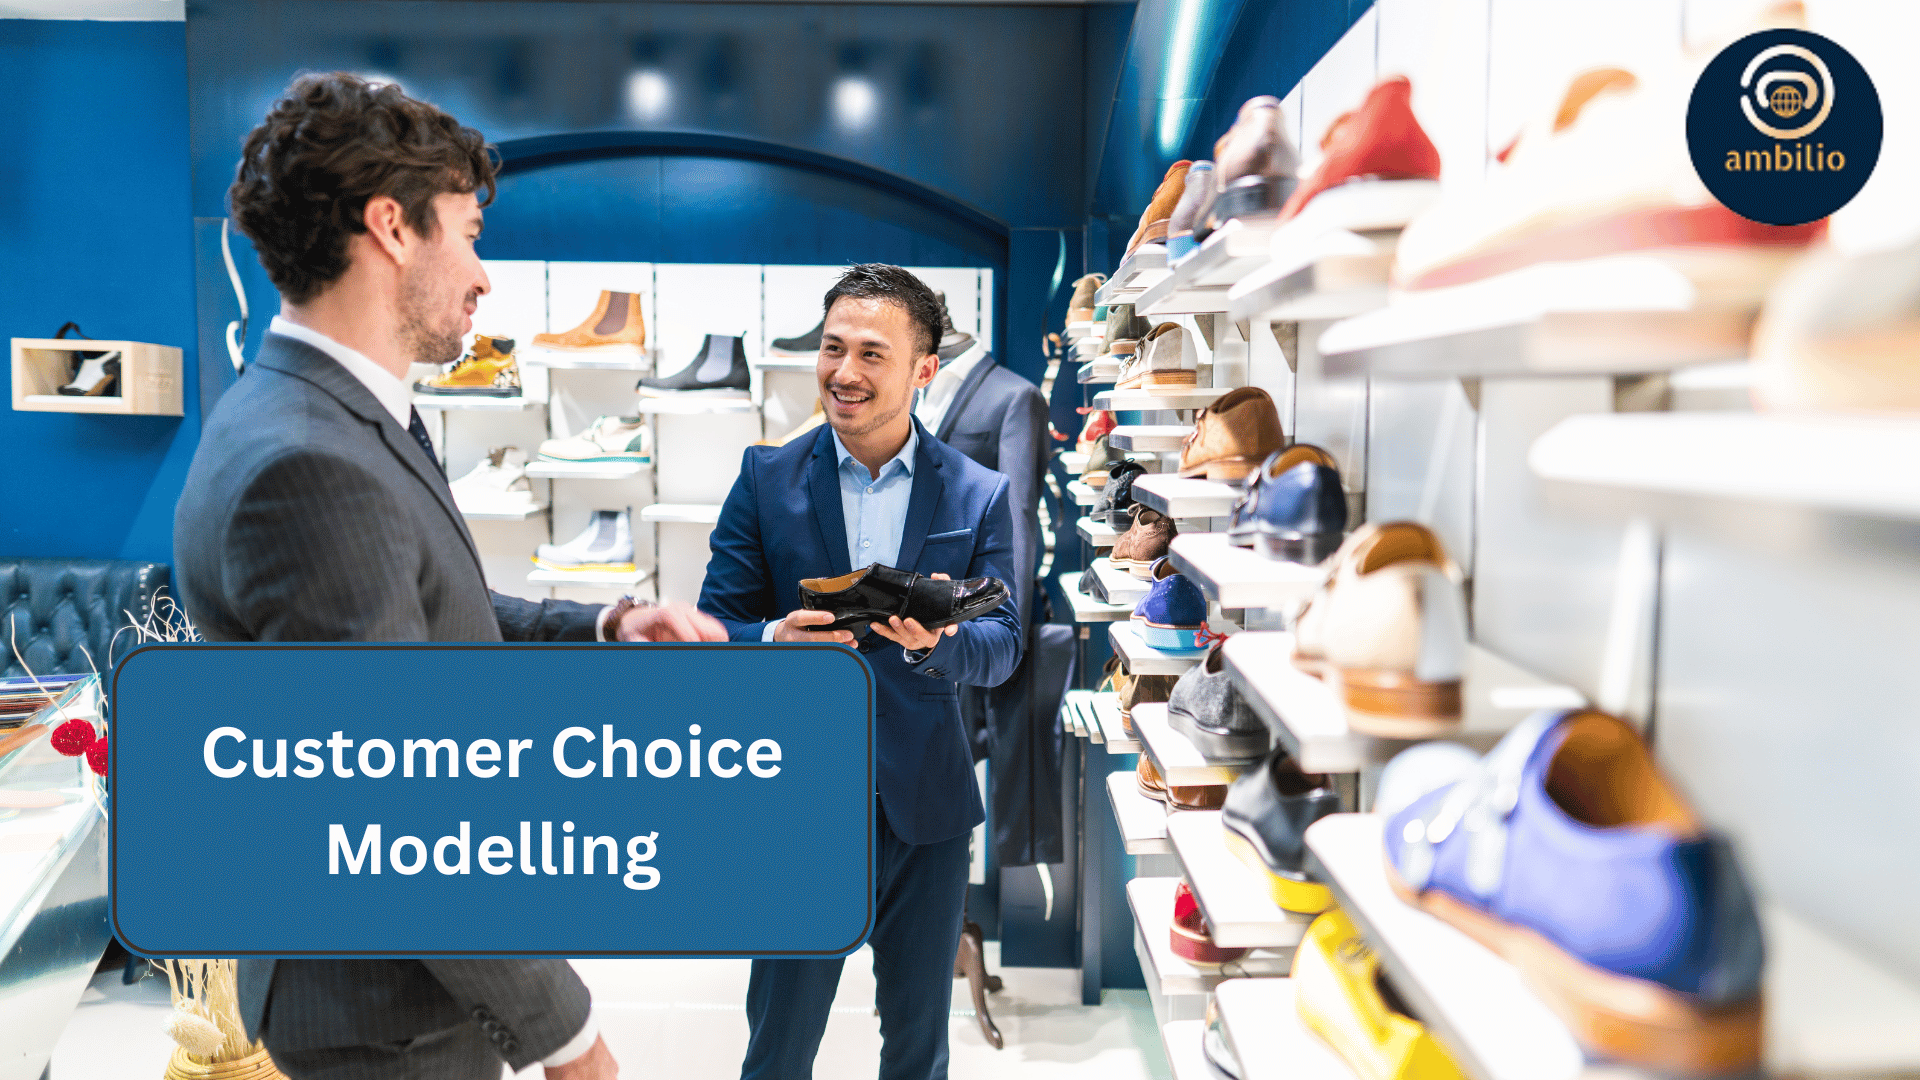 Maximizing Sales and Customer Satisfaction with Choice modelling